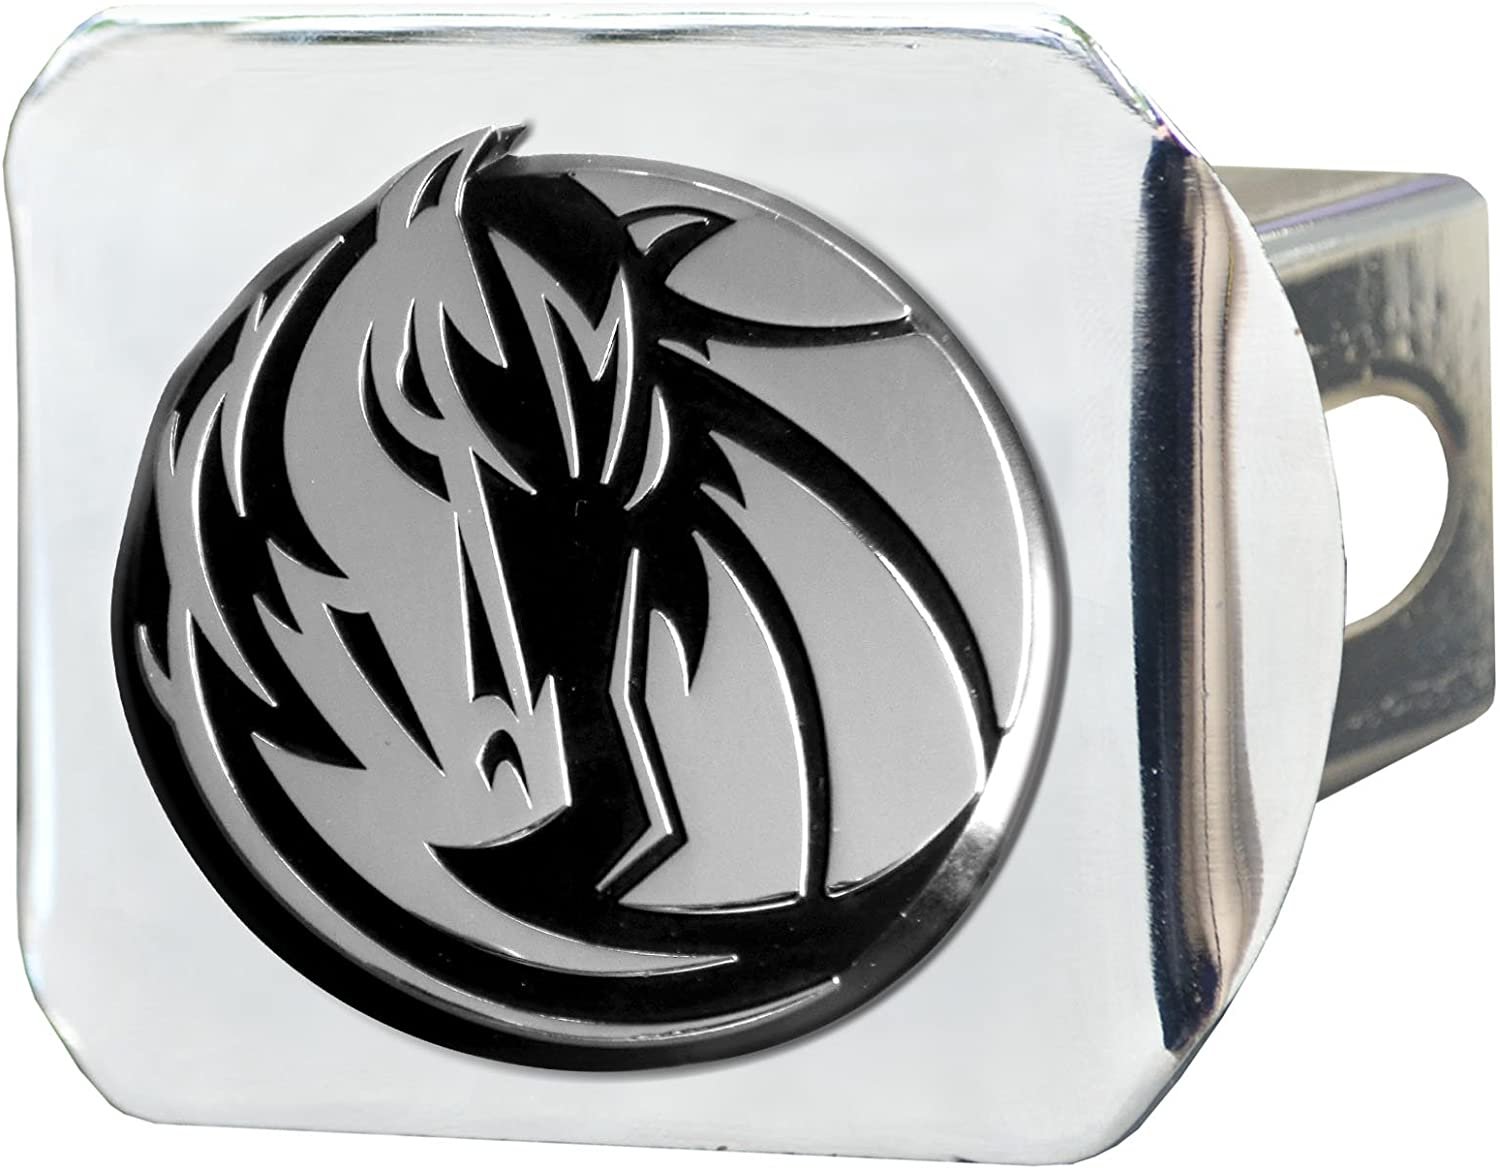 Dallas Mavericks Hitch Cover Solid Metal with Raised Chrome Metal Emblem 2" Square Type III